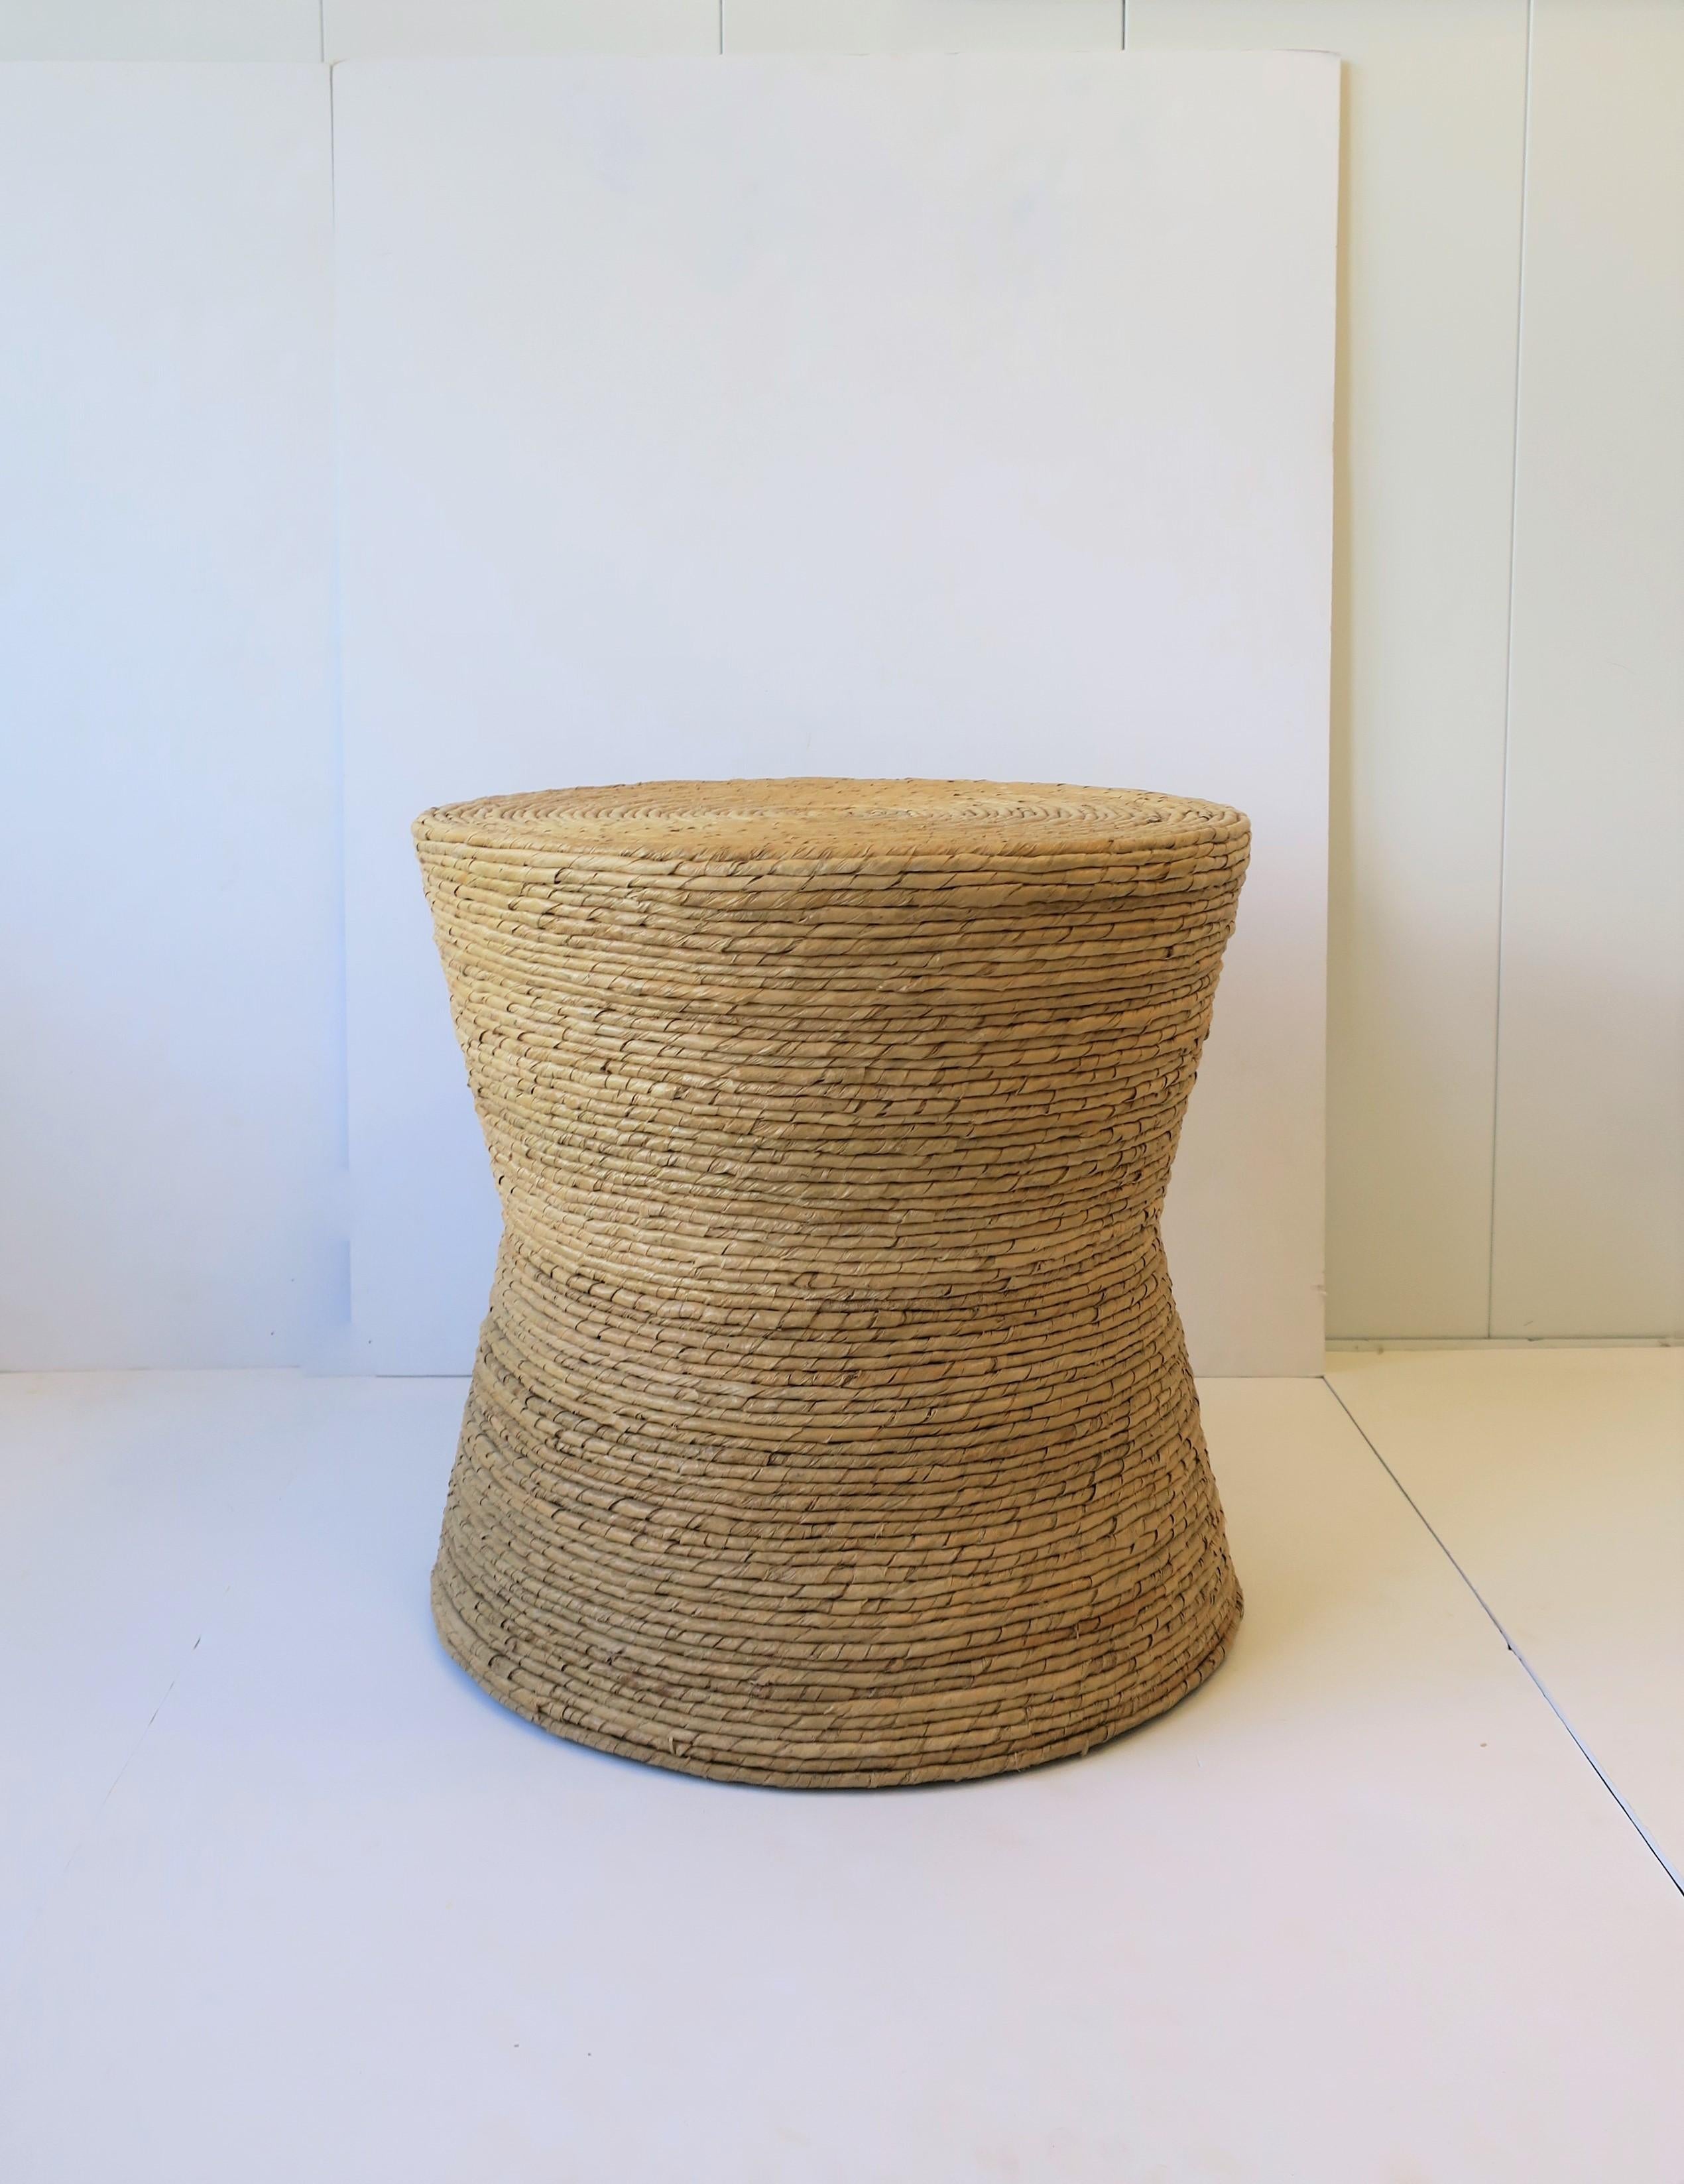 A beautiful wicker round side or end table with hourglass shape. 

Table measures: 19